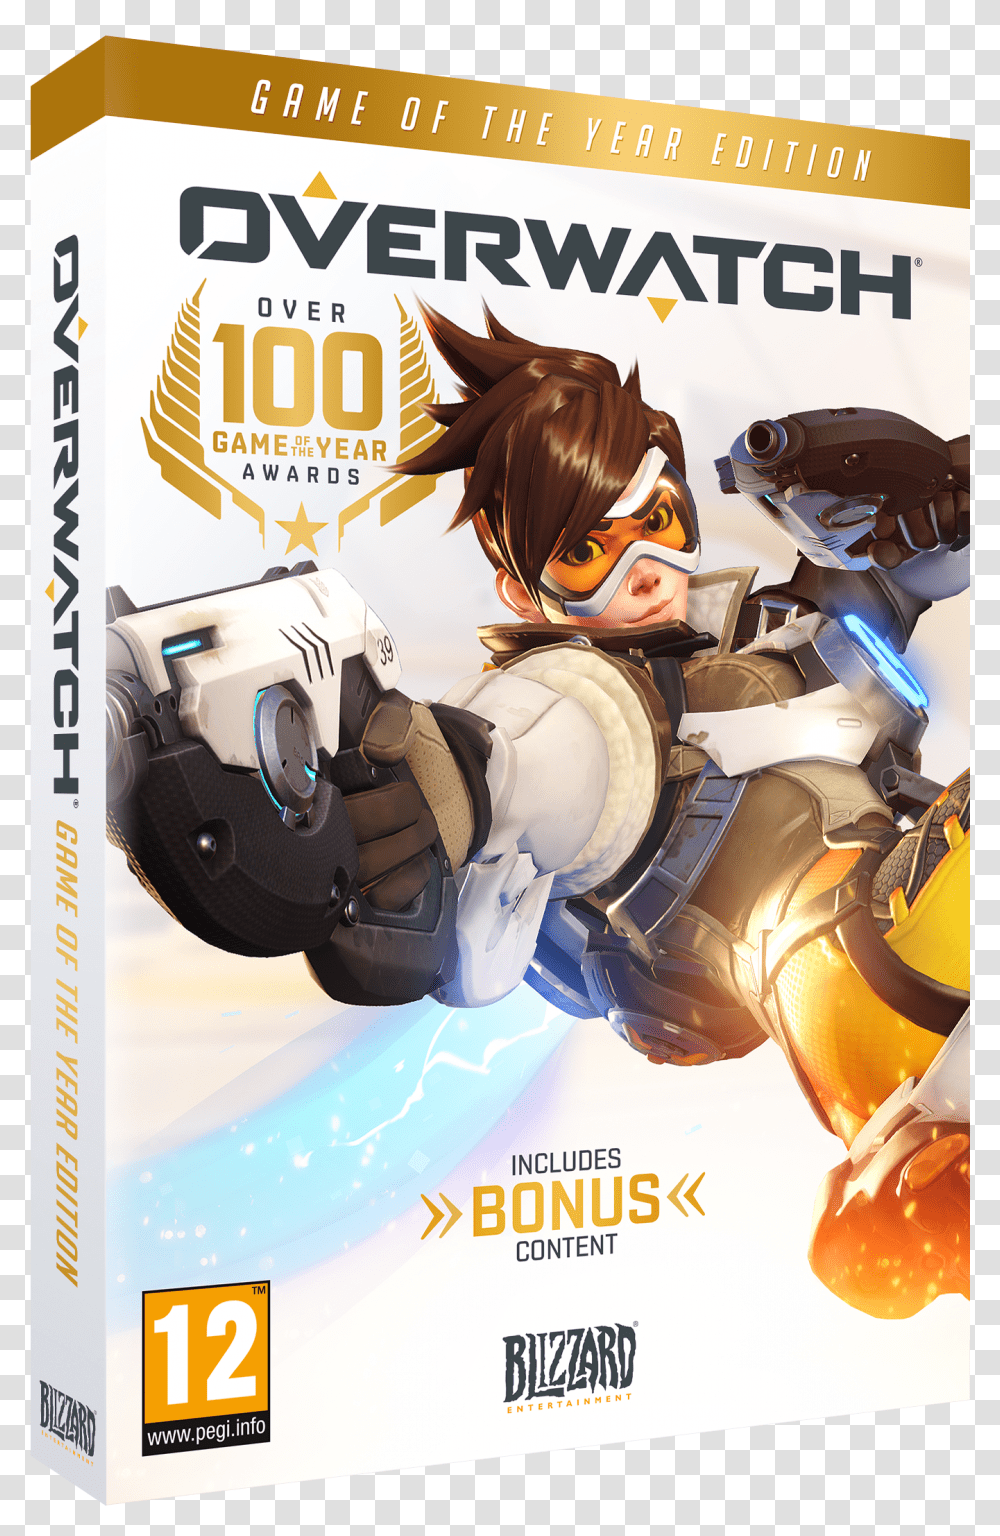 Overwatch Game Of The Year Edition Box, Helmet, Apparel, Poster Transparent Png